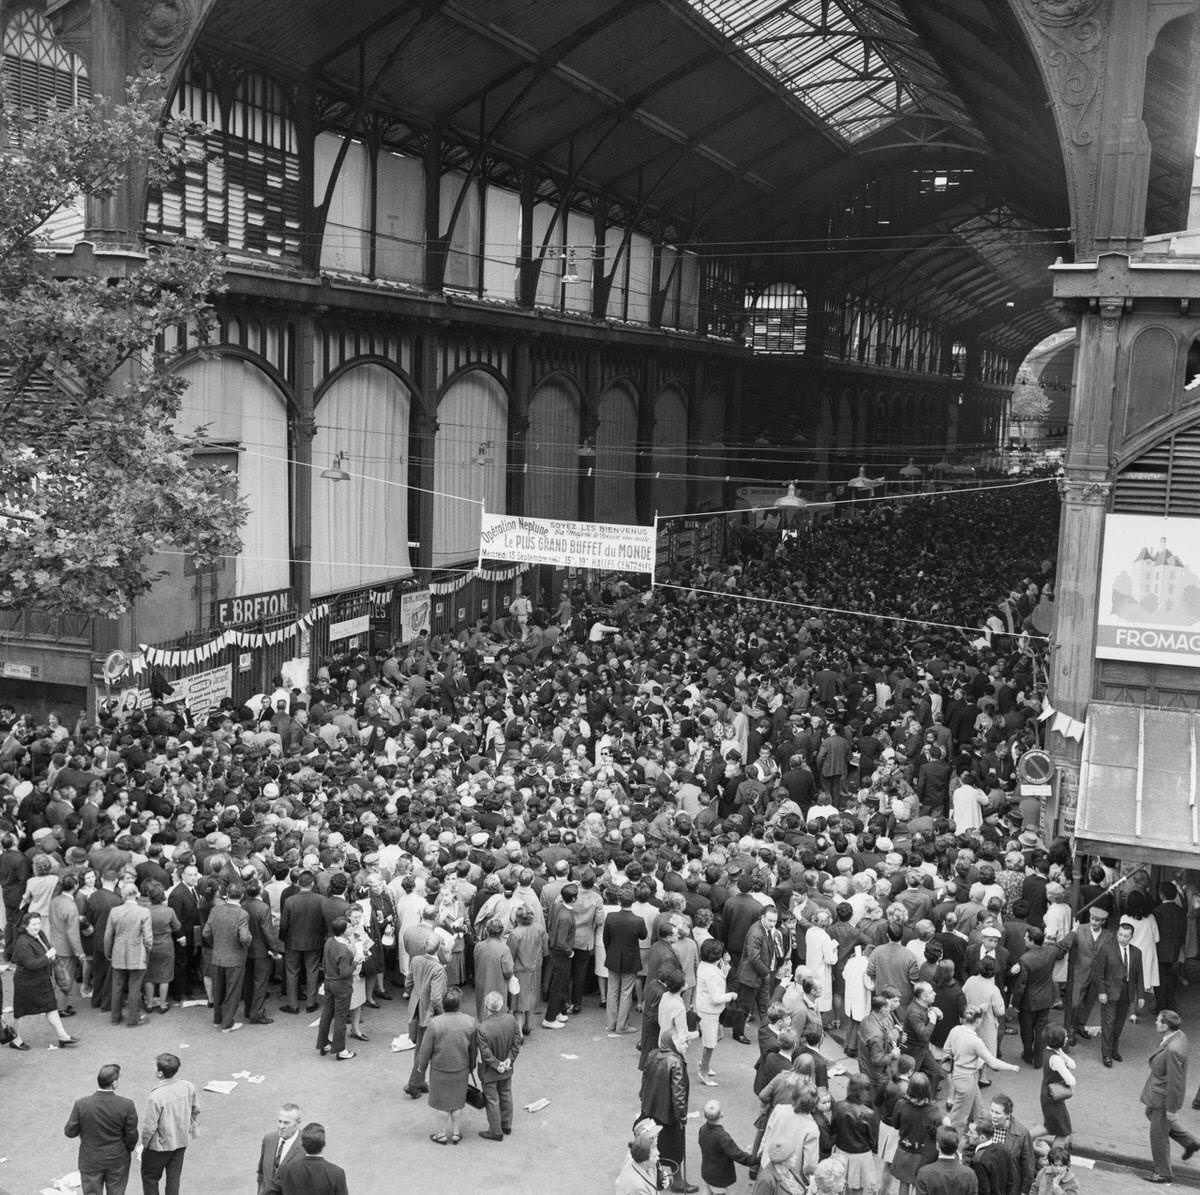 General view of the crowd at Les Halles for the great fish fair, in Paris, 1967